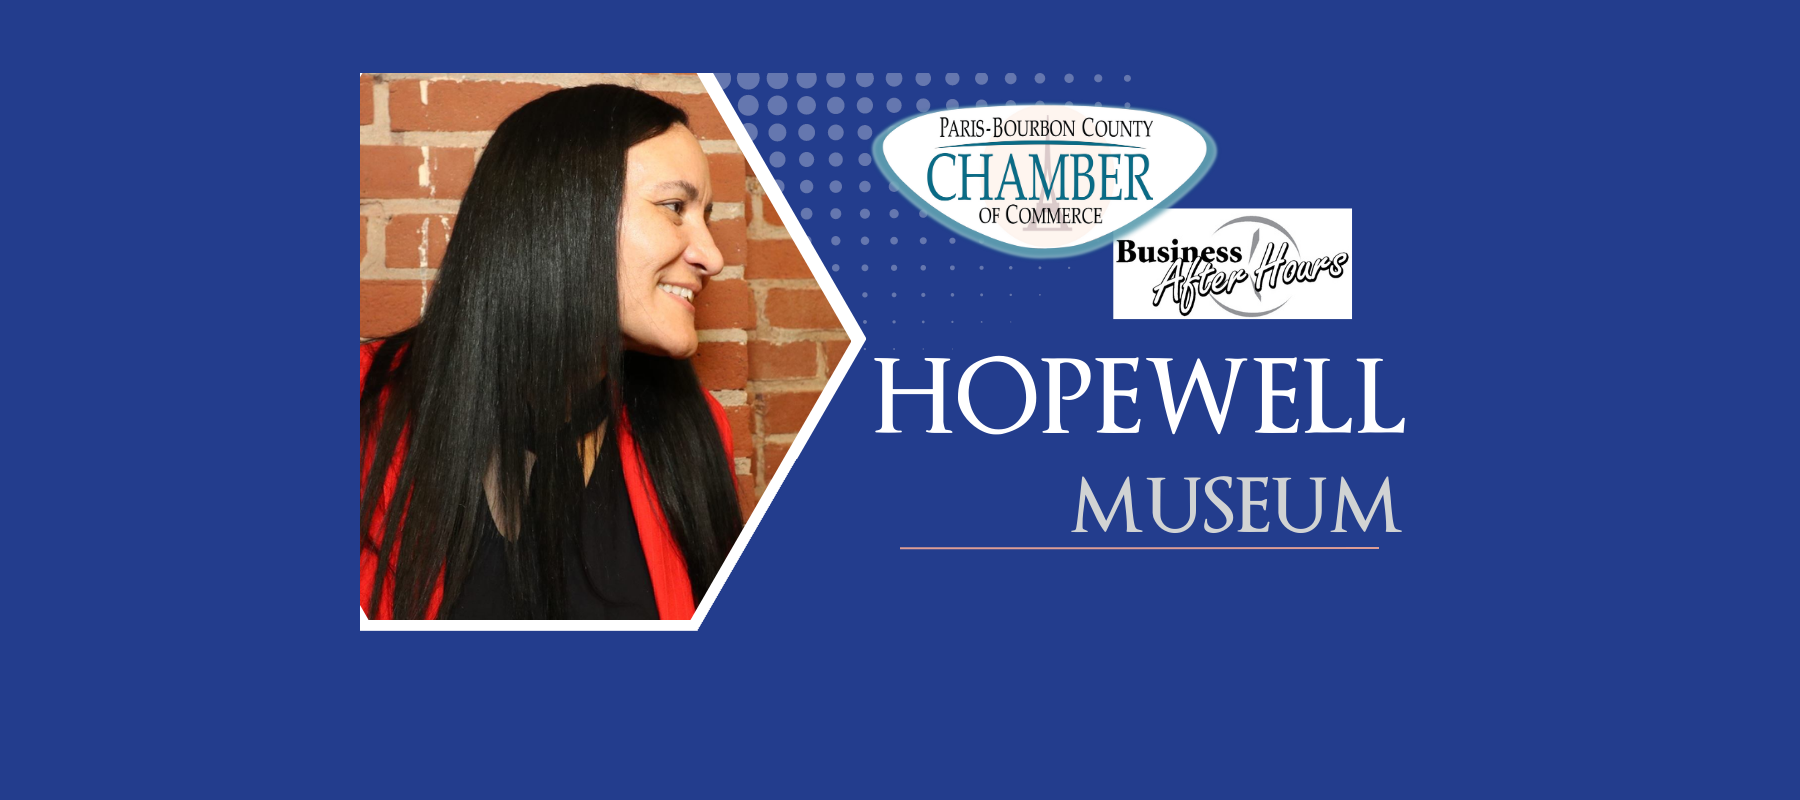 Paris-Bourbon County Chamber of Commerce Business After Hours - Hopewell Musuem Enjoy a night of networking and meet the museum's new executive director.